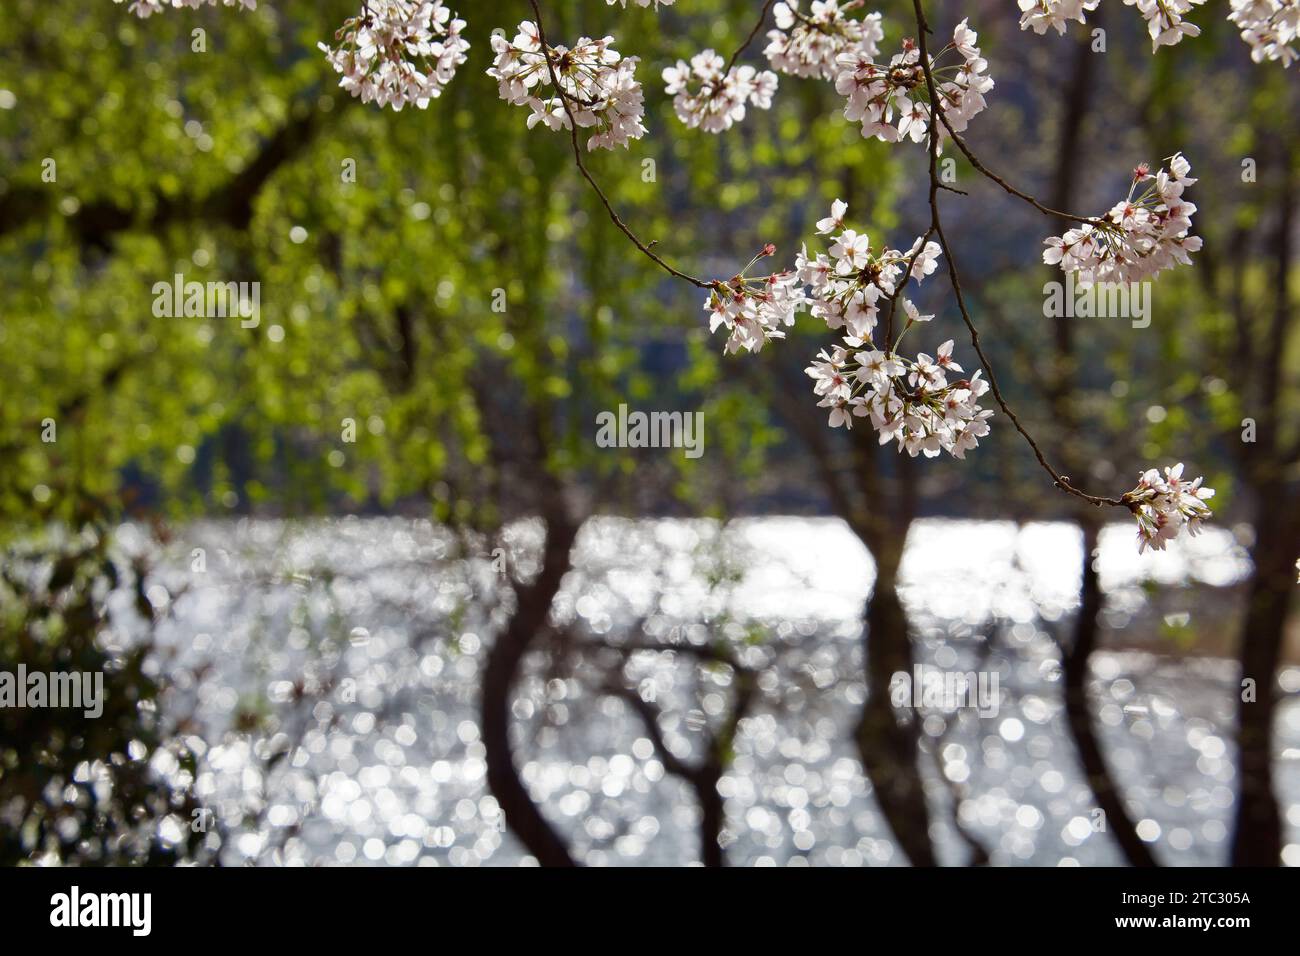 In the foreground, delicate small cherry blossoms hang from thin branches, while in the background, a serene landscape of lush green trees and blurred Stock Photo